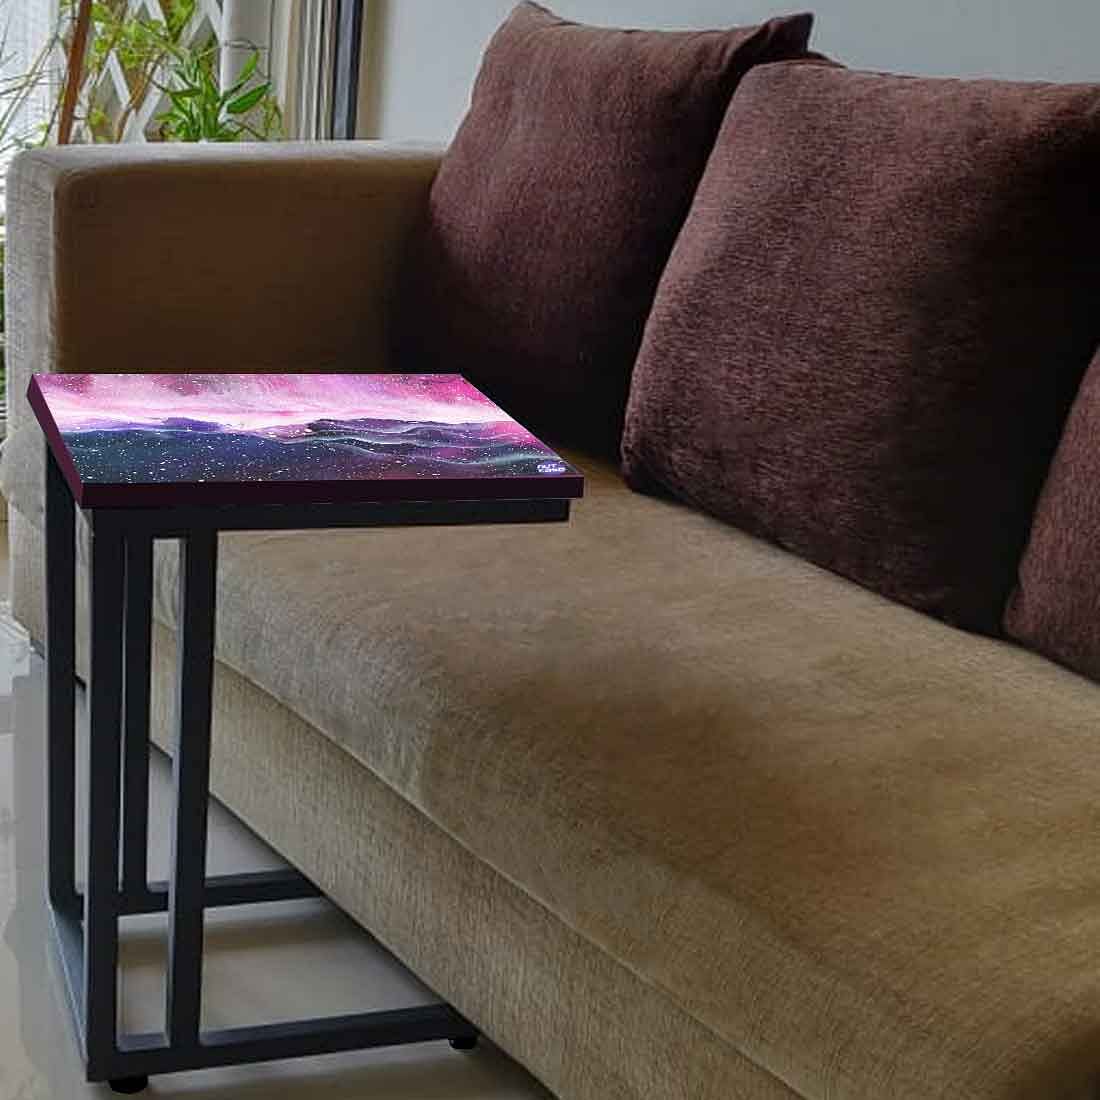 Latest C Shaped End Table - Space Colorful Watercolor Nutcase